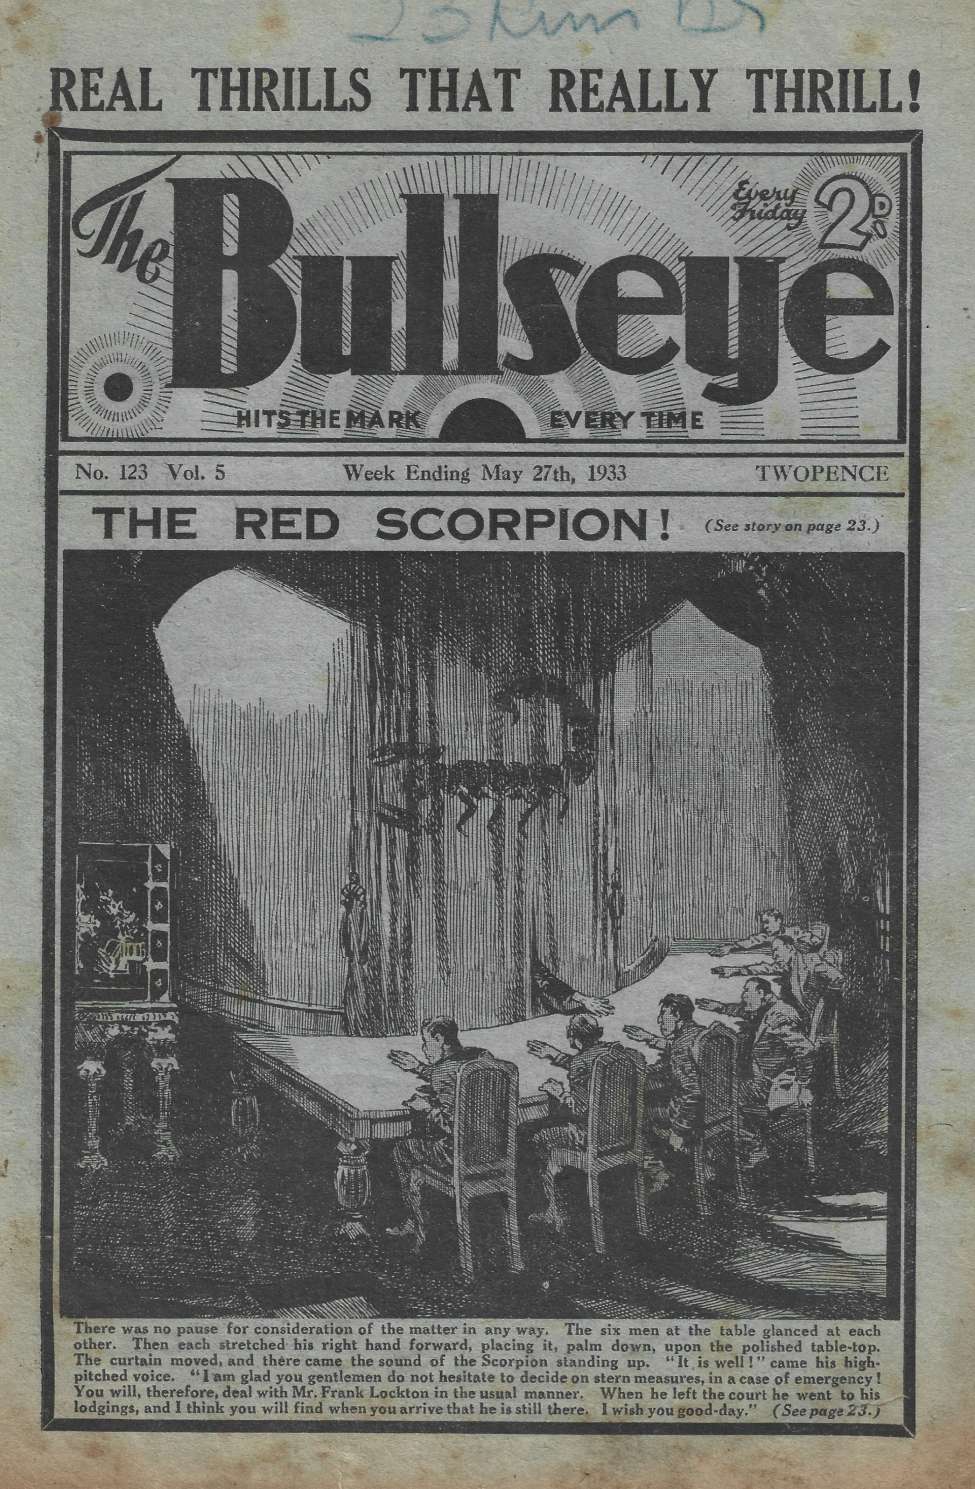 Book Cover For The Bullseye v5 123 - The Red Scorpion!